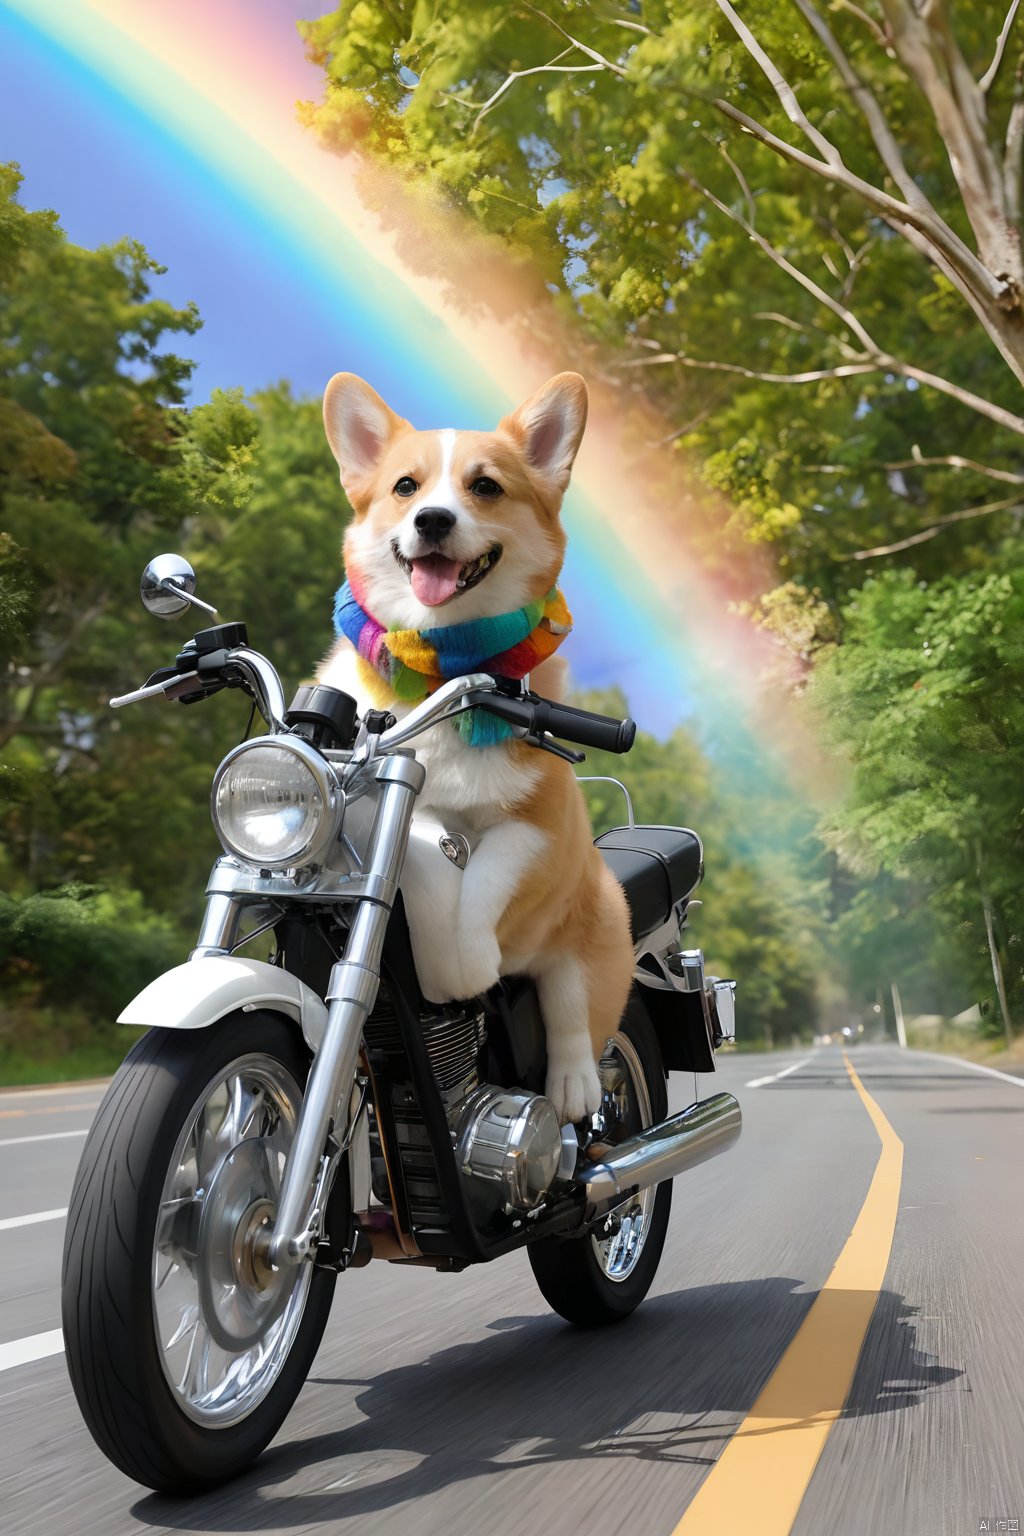  very beautiful,high quality,(a dog riding a motorcycle:1.1),corgi,dog,solo,(motor vehicle:1.2),riding,scarf,running on the rainbow,tree,extreme perspective,looking up at the camera,rainbow,furry,3d style,C4D,blender,kawaii,water spray,speed,bifrost,(masterpiece:1.2), best quality,PIXIV,humorous,beautiful colorful background,